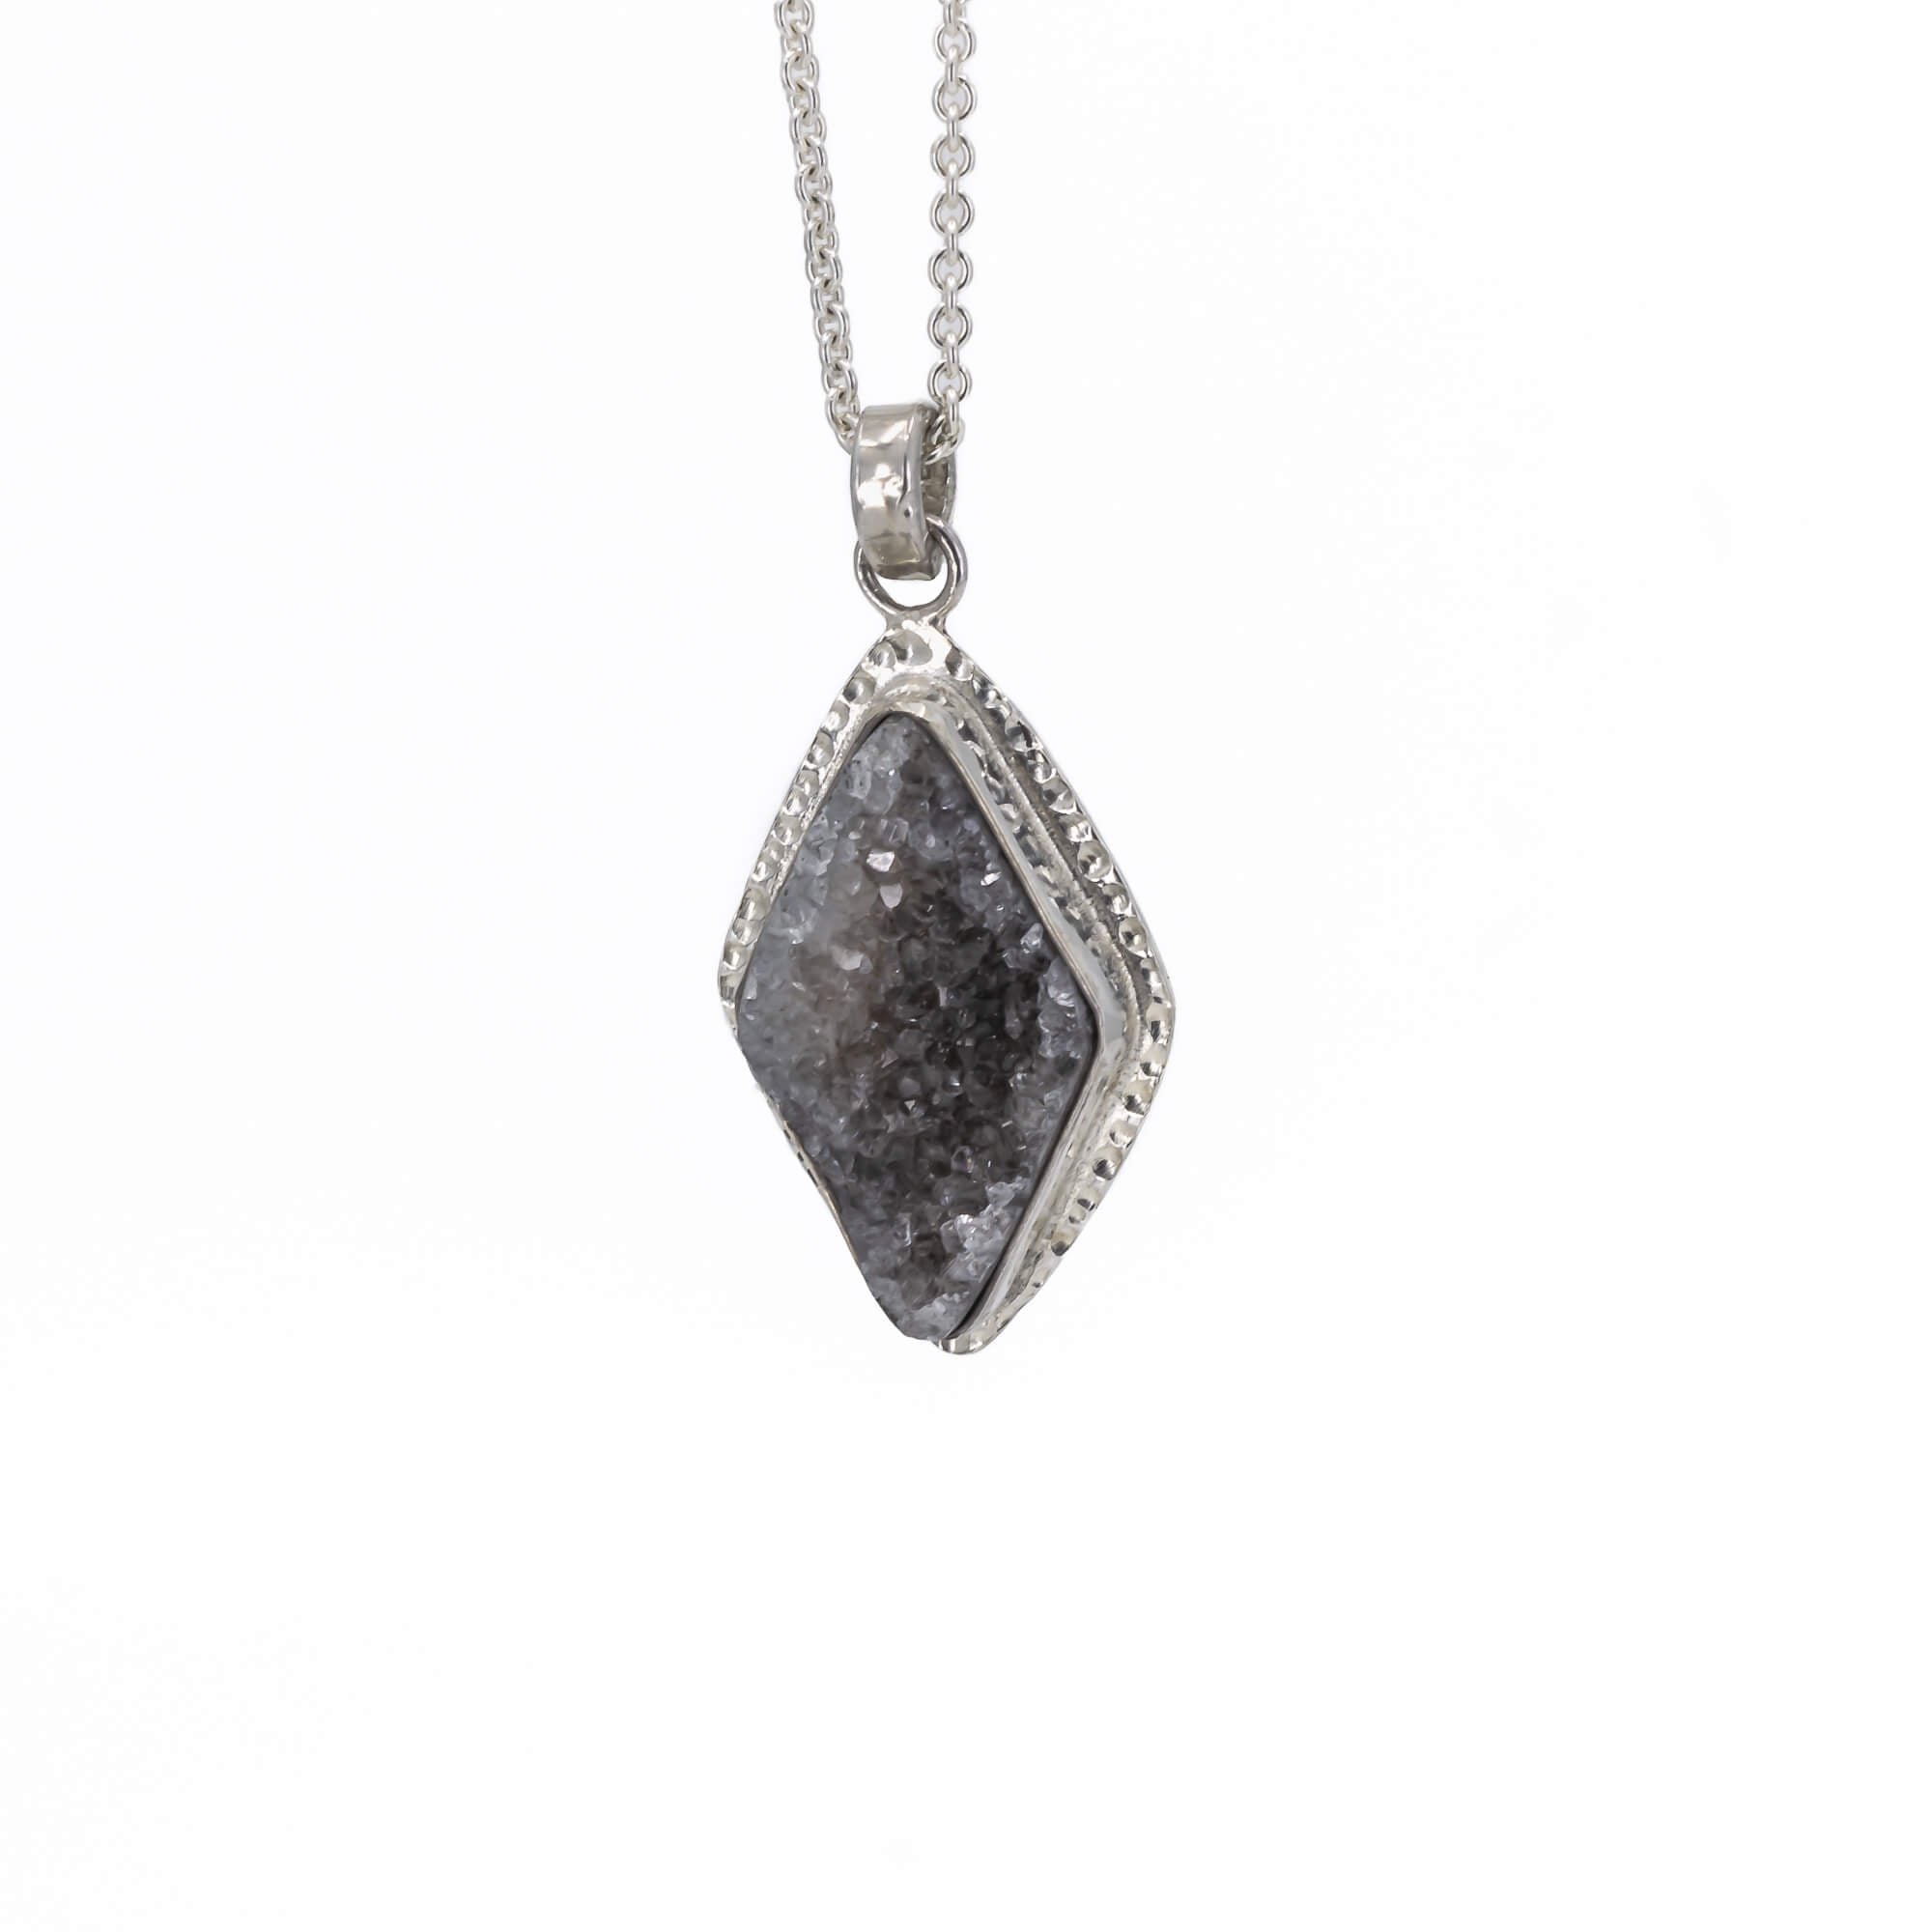 Grey and black large druzy pendant necklace in sterling silver